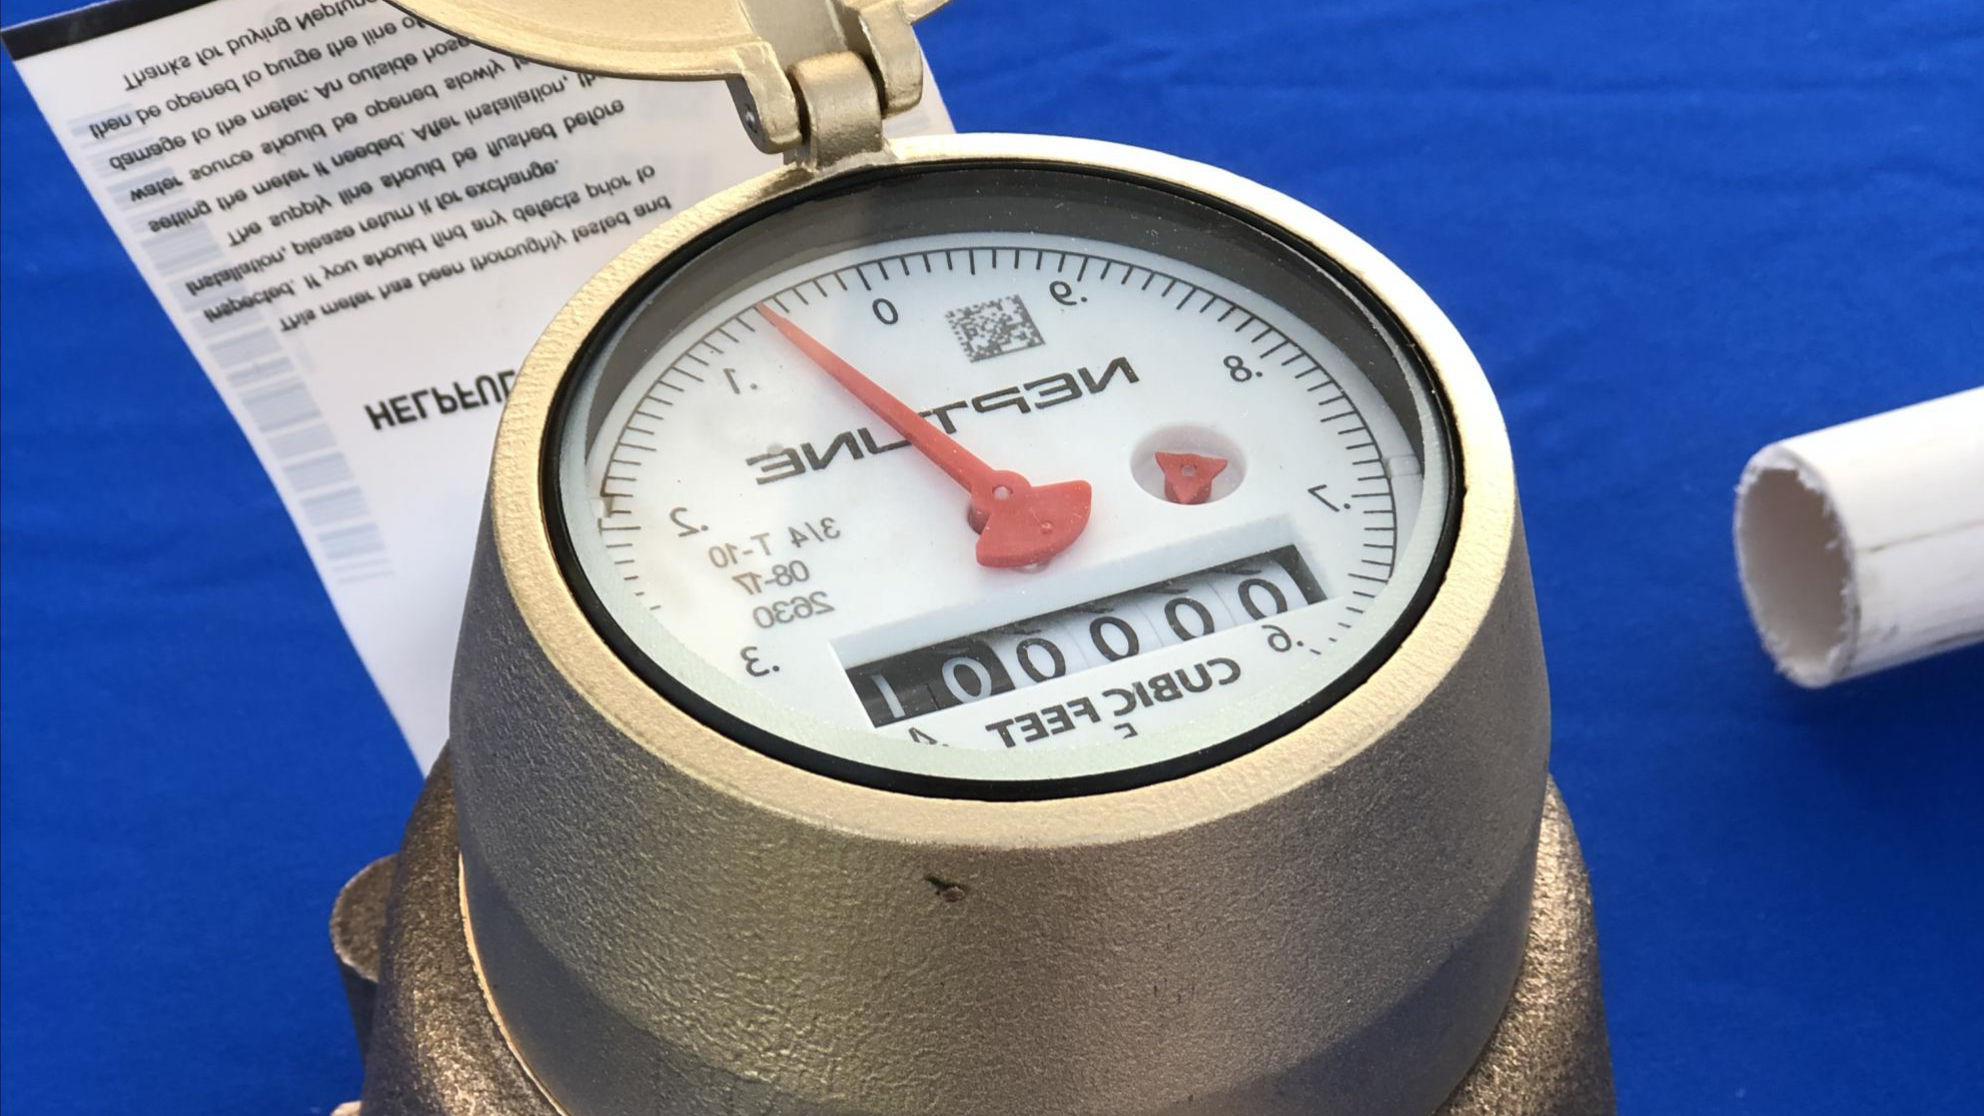 Closeup of a new water meter on a table